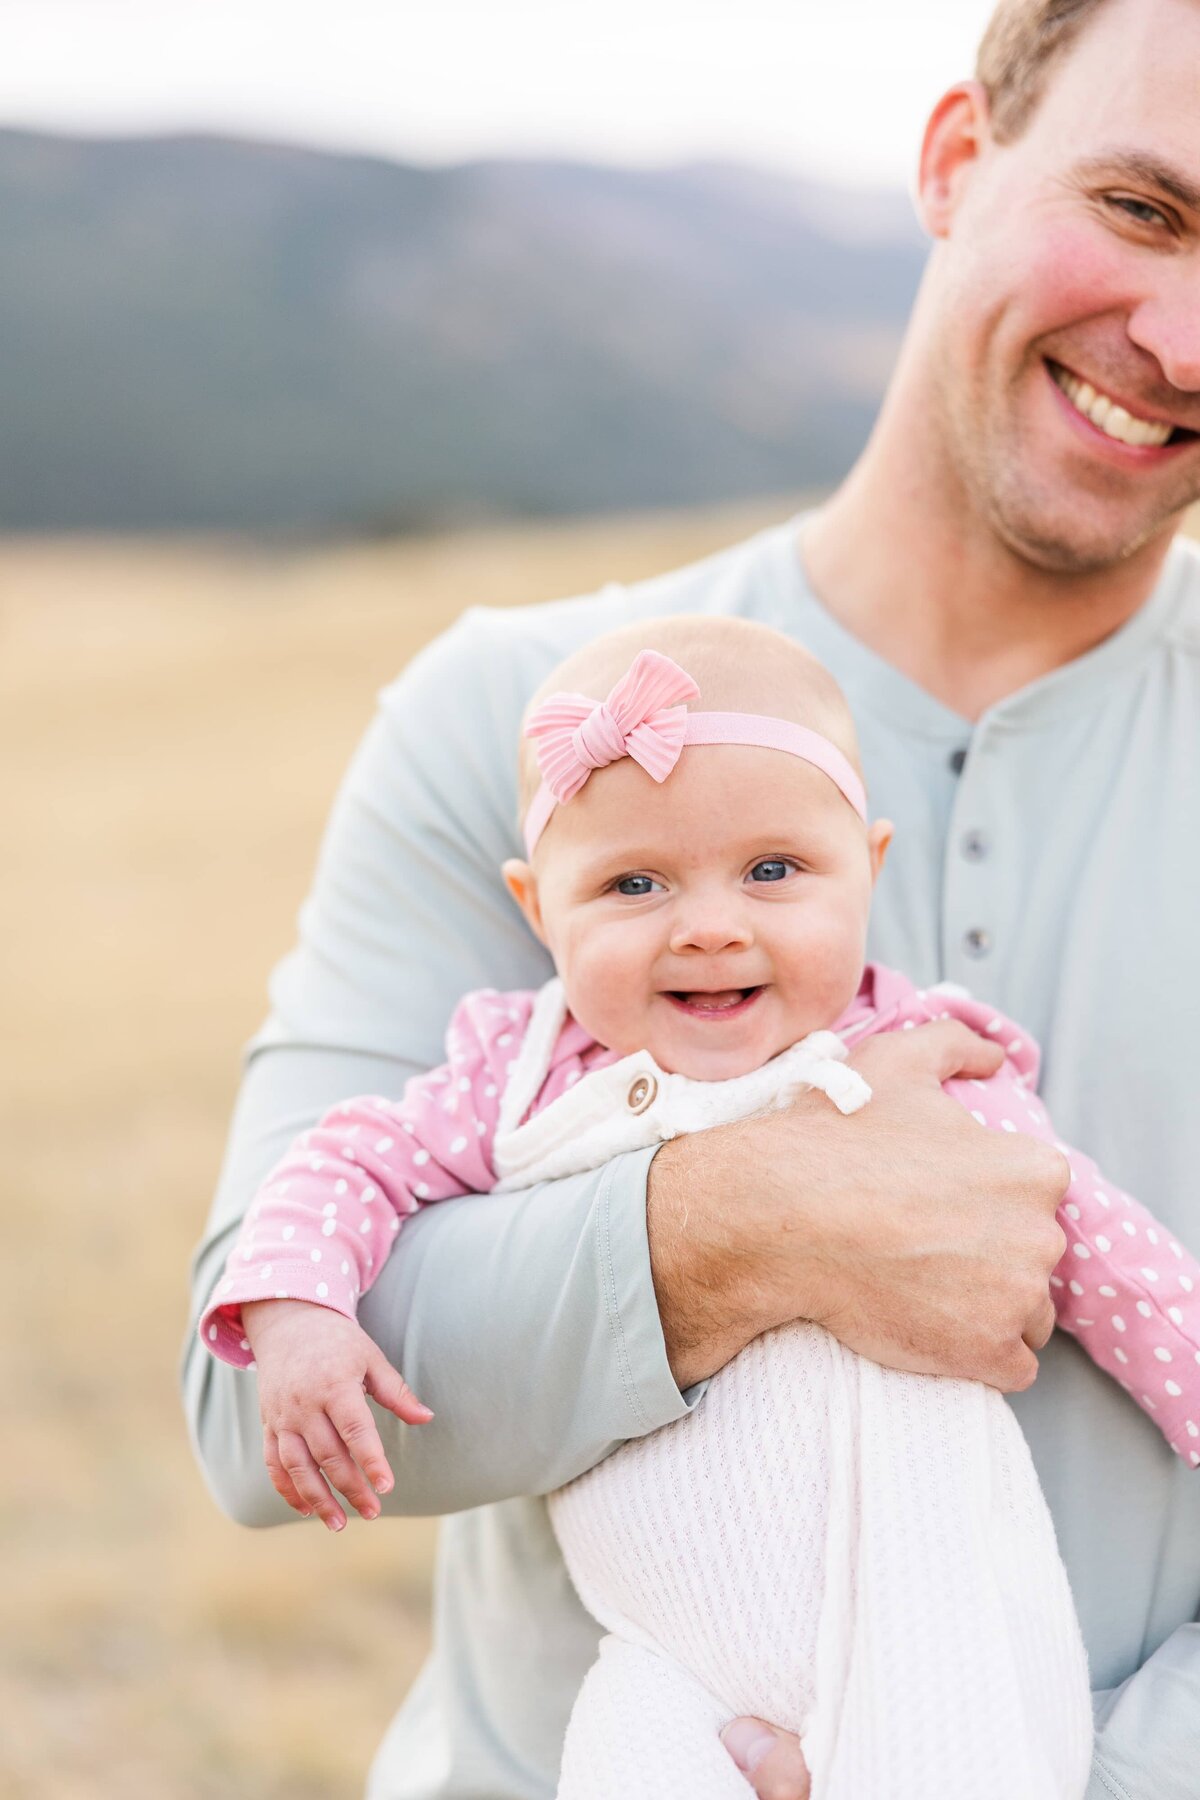 baby girl is smiling at camera while dad holds her in Moraine Park